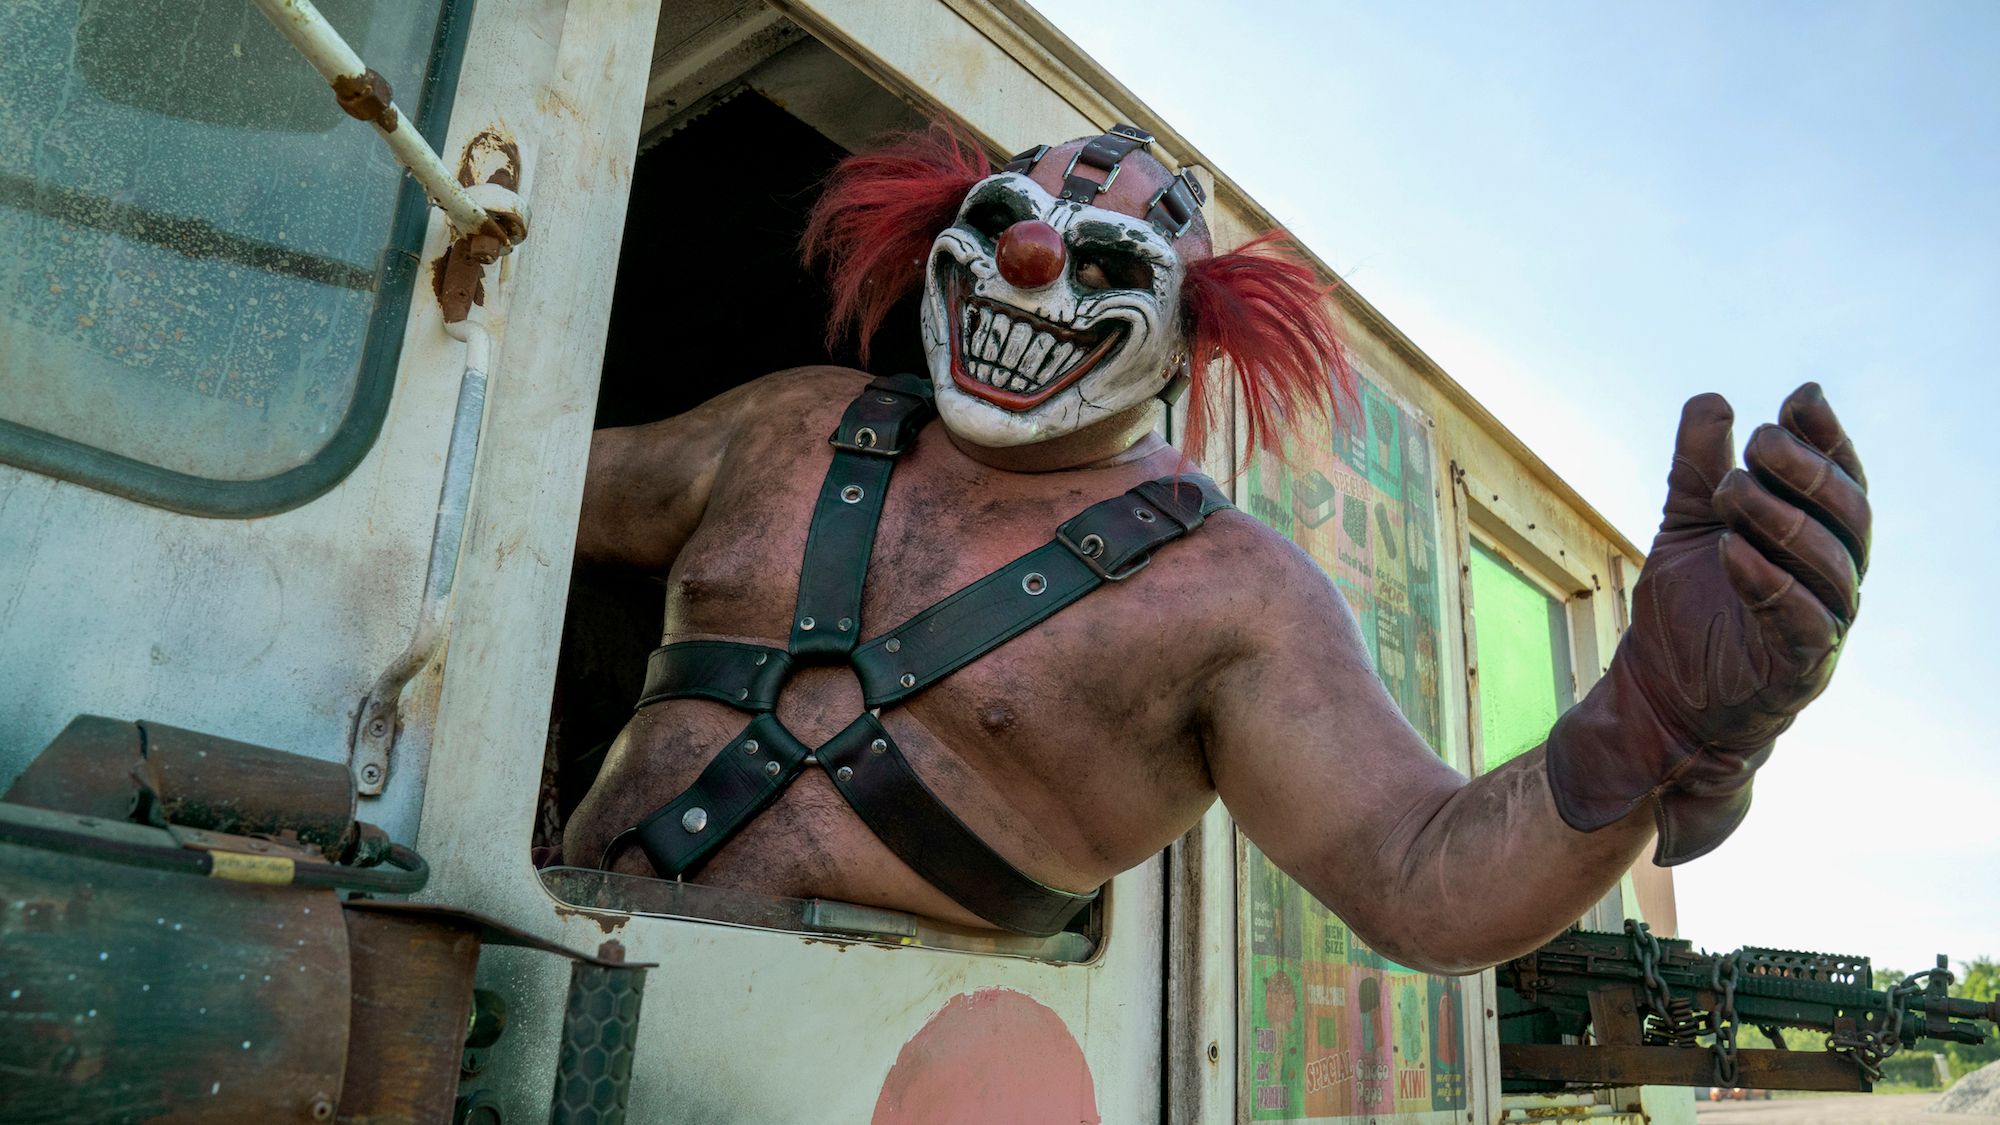 Twisted Metal' Trailer, Release Date, Plot, Cast, and More